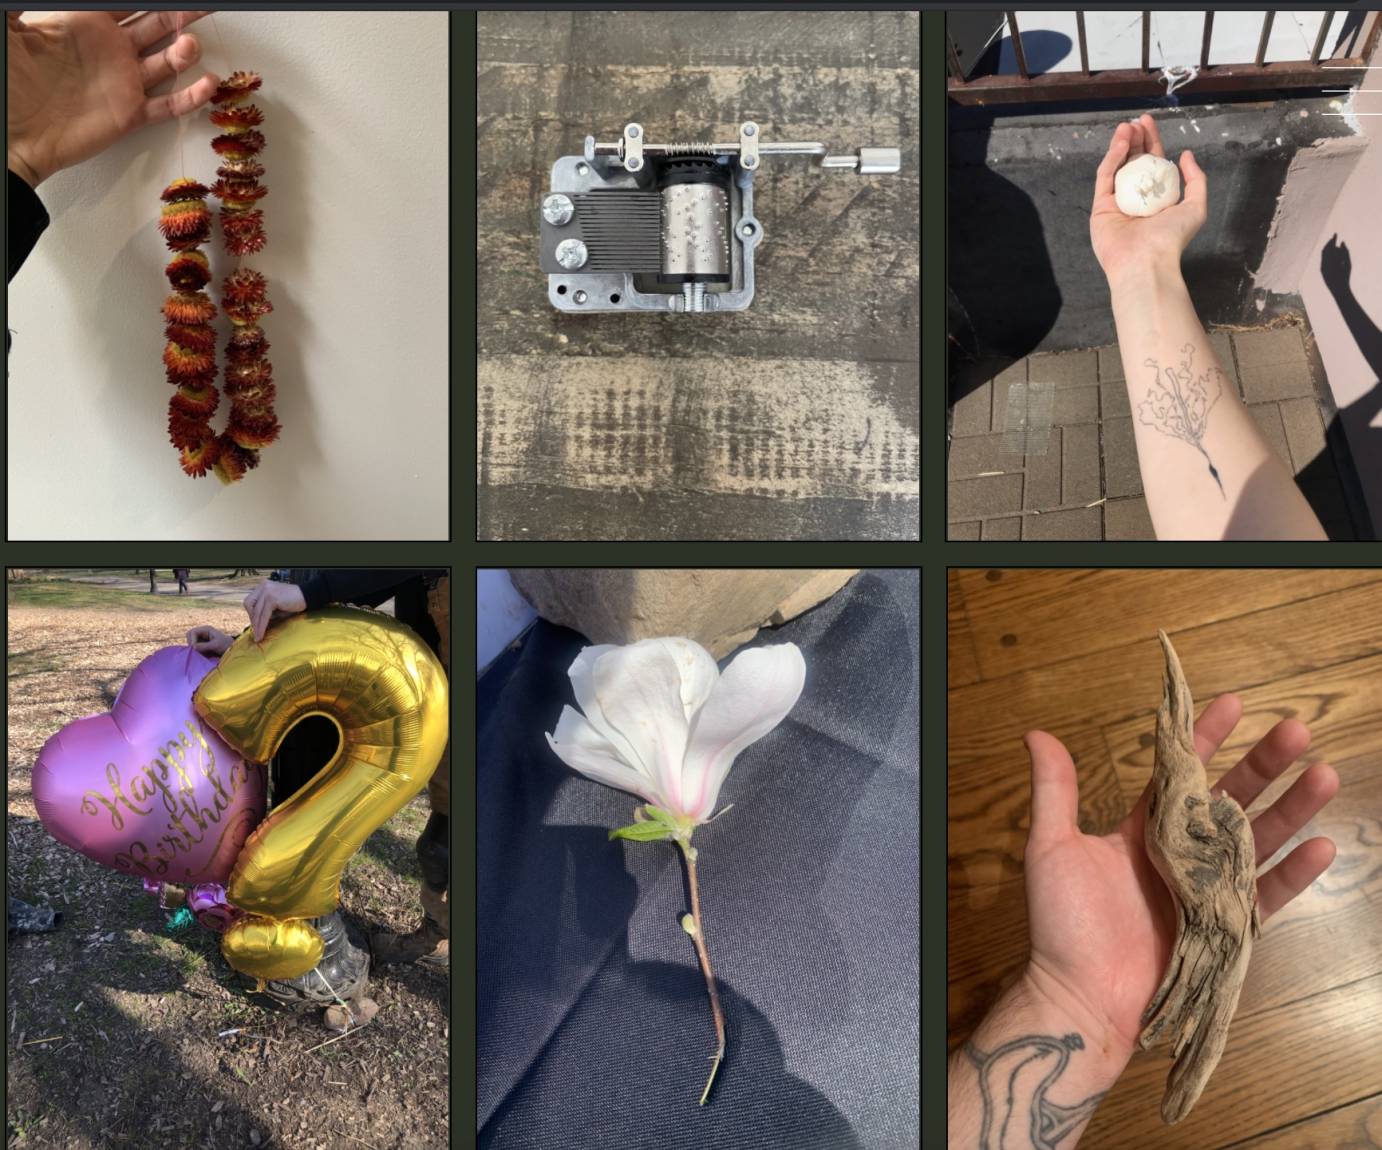 photos from the online grief altar, which include flowers, a tiny music box, flowers, and balloons